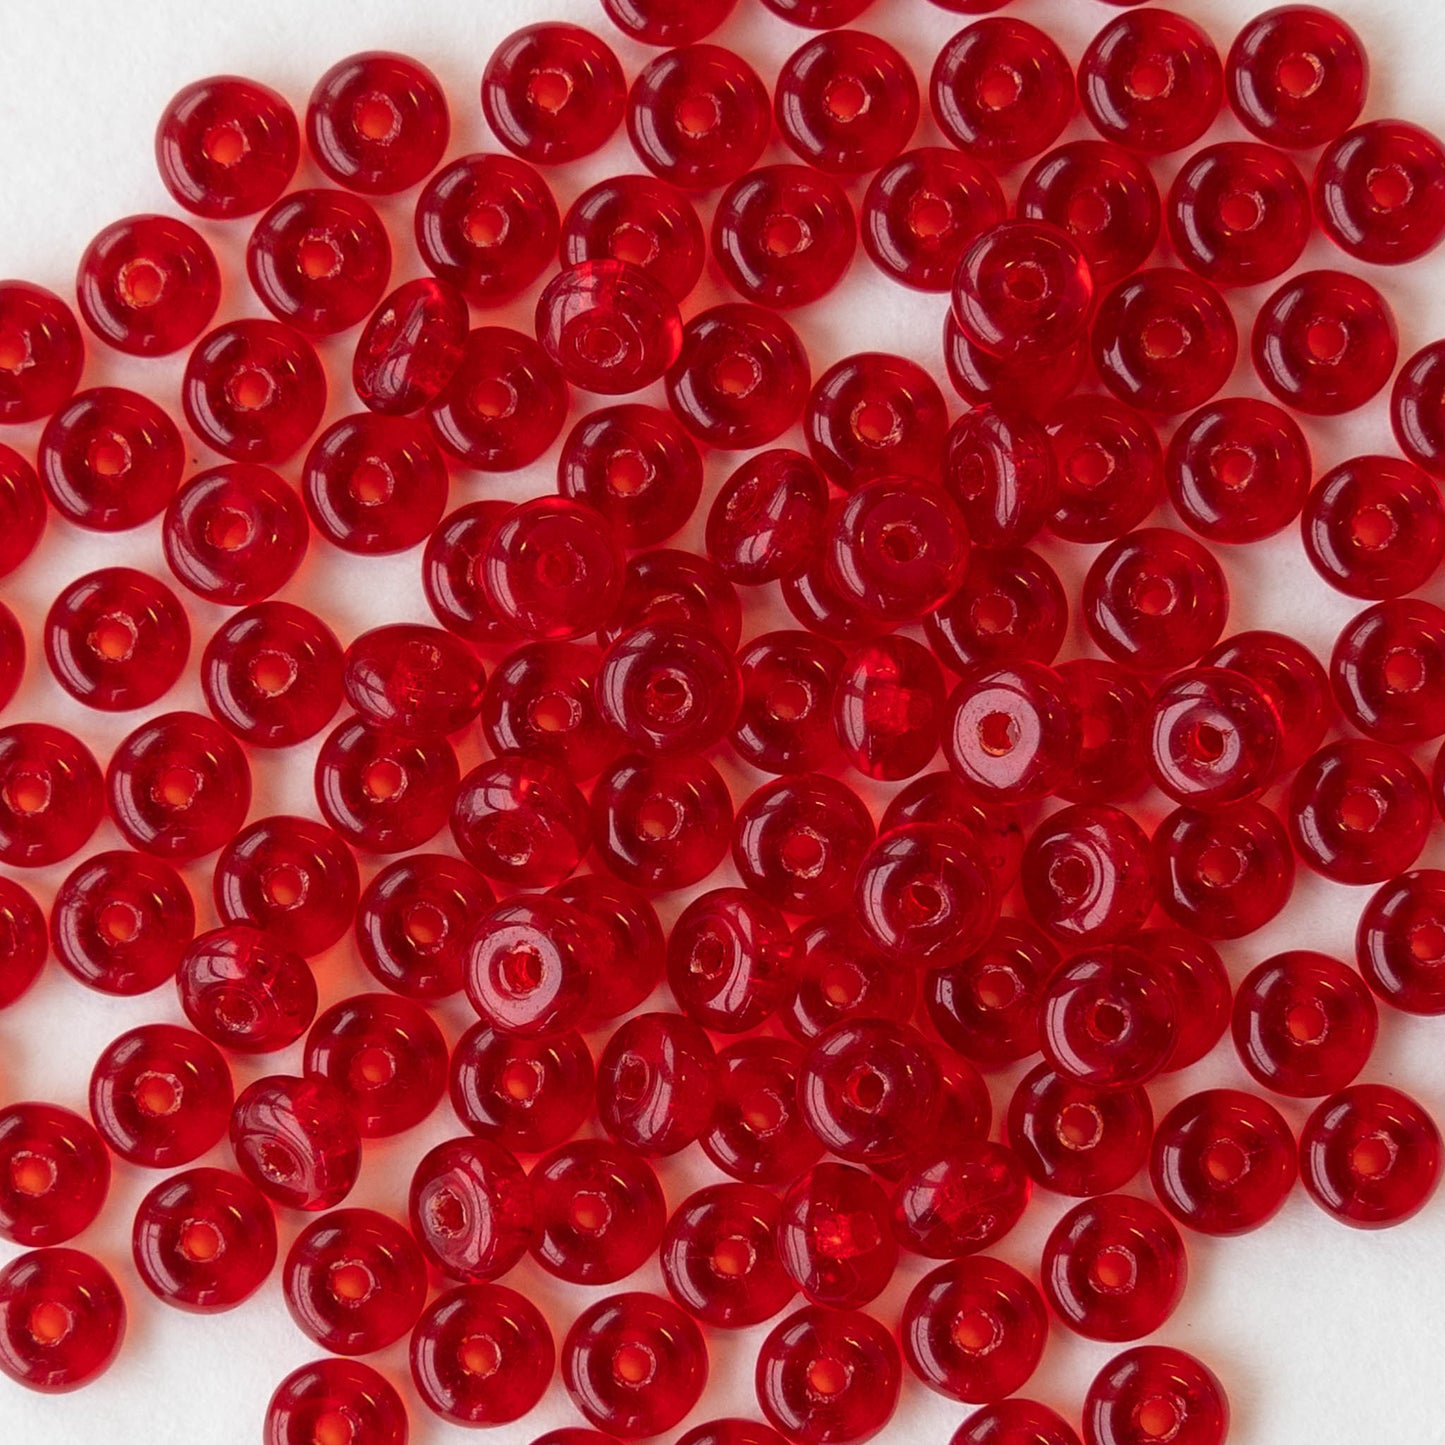 4mm Rondelle Beads - Red - 100 Beads